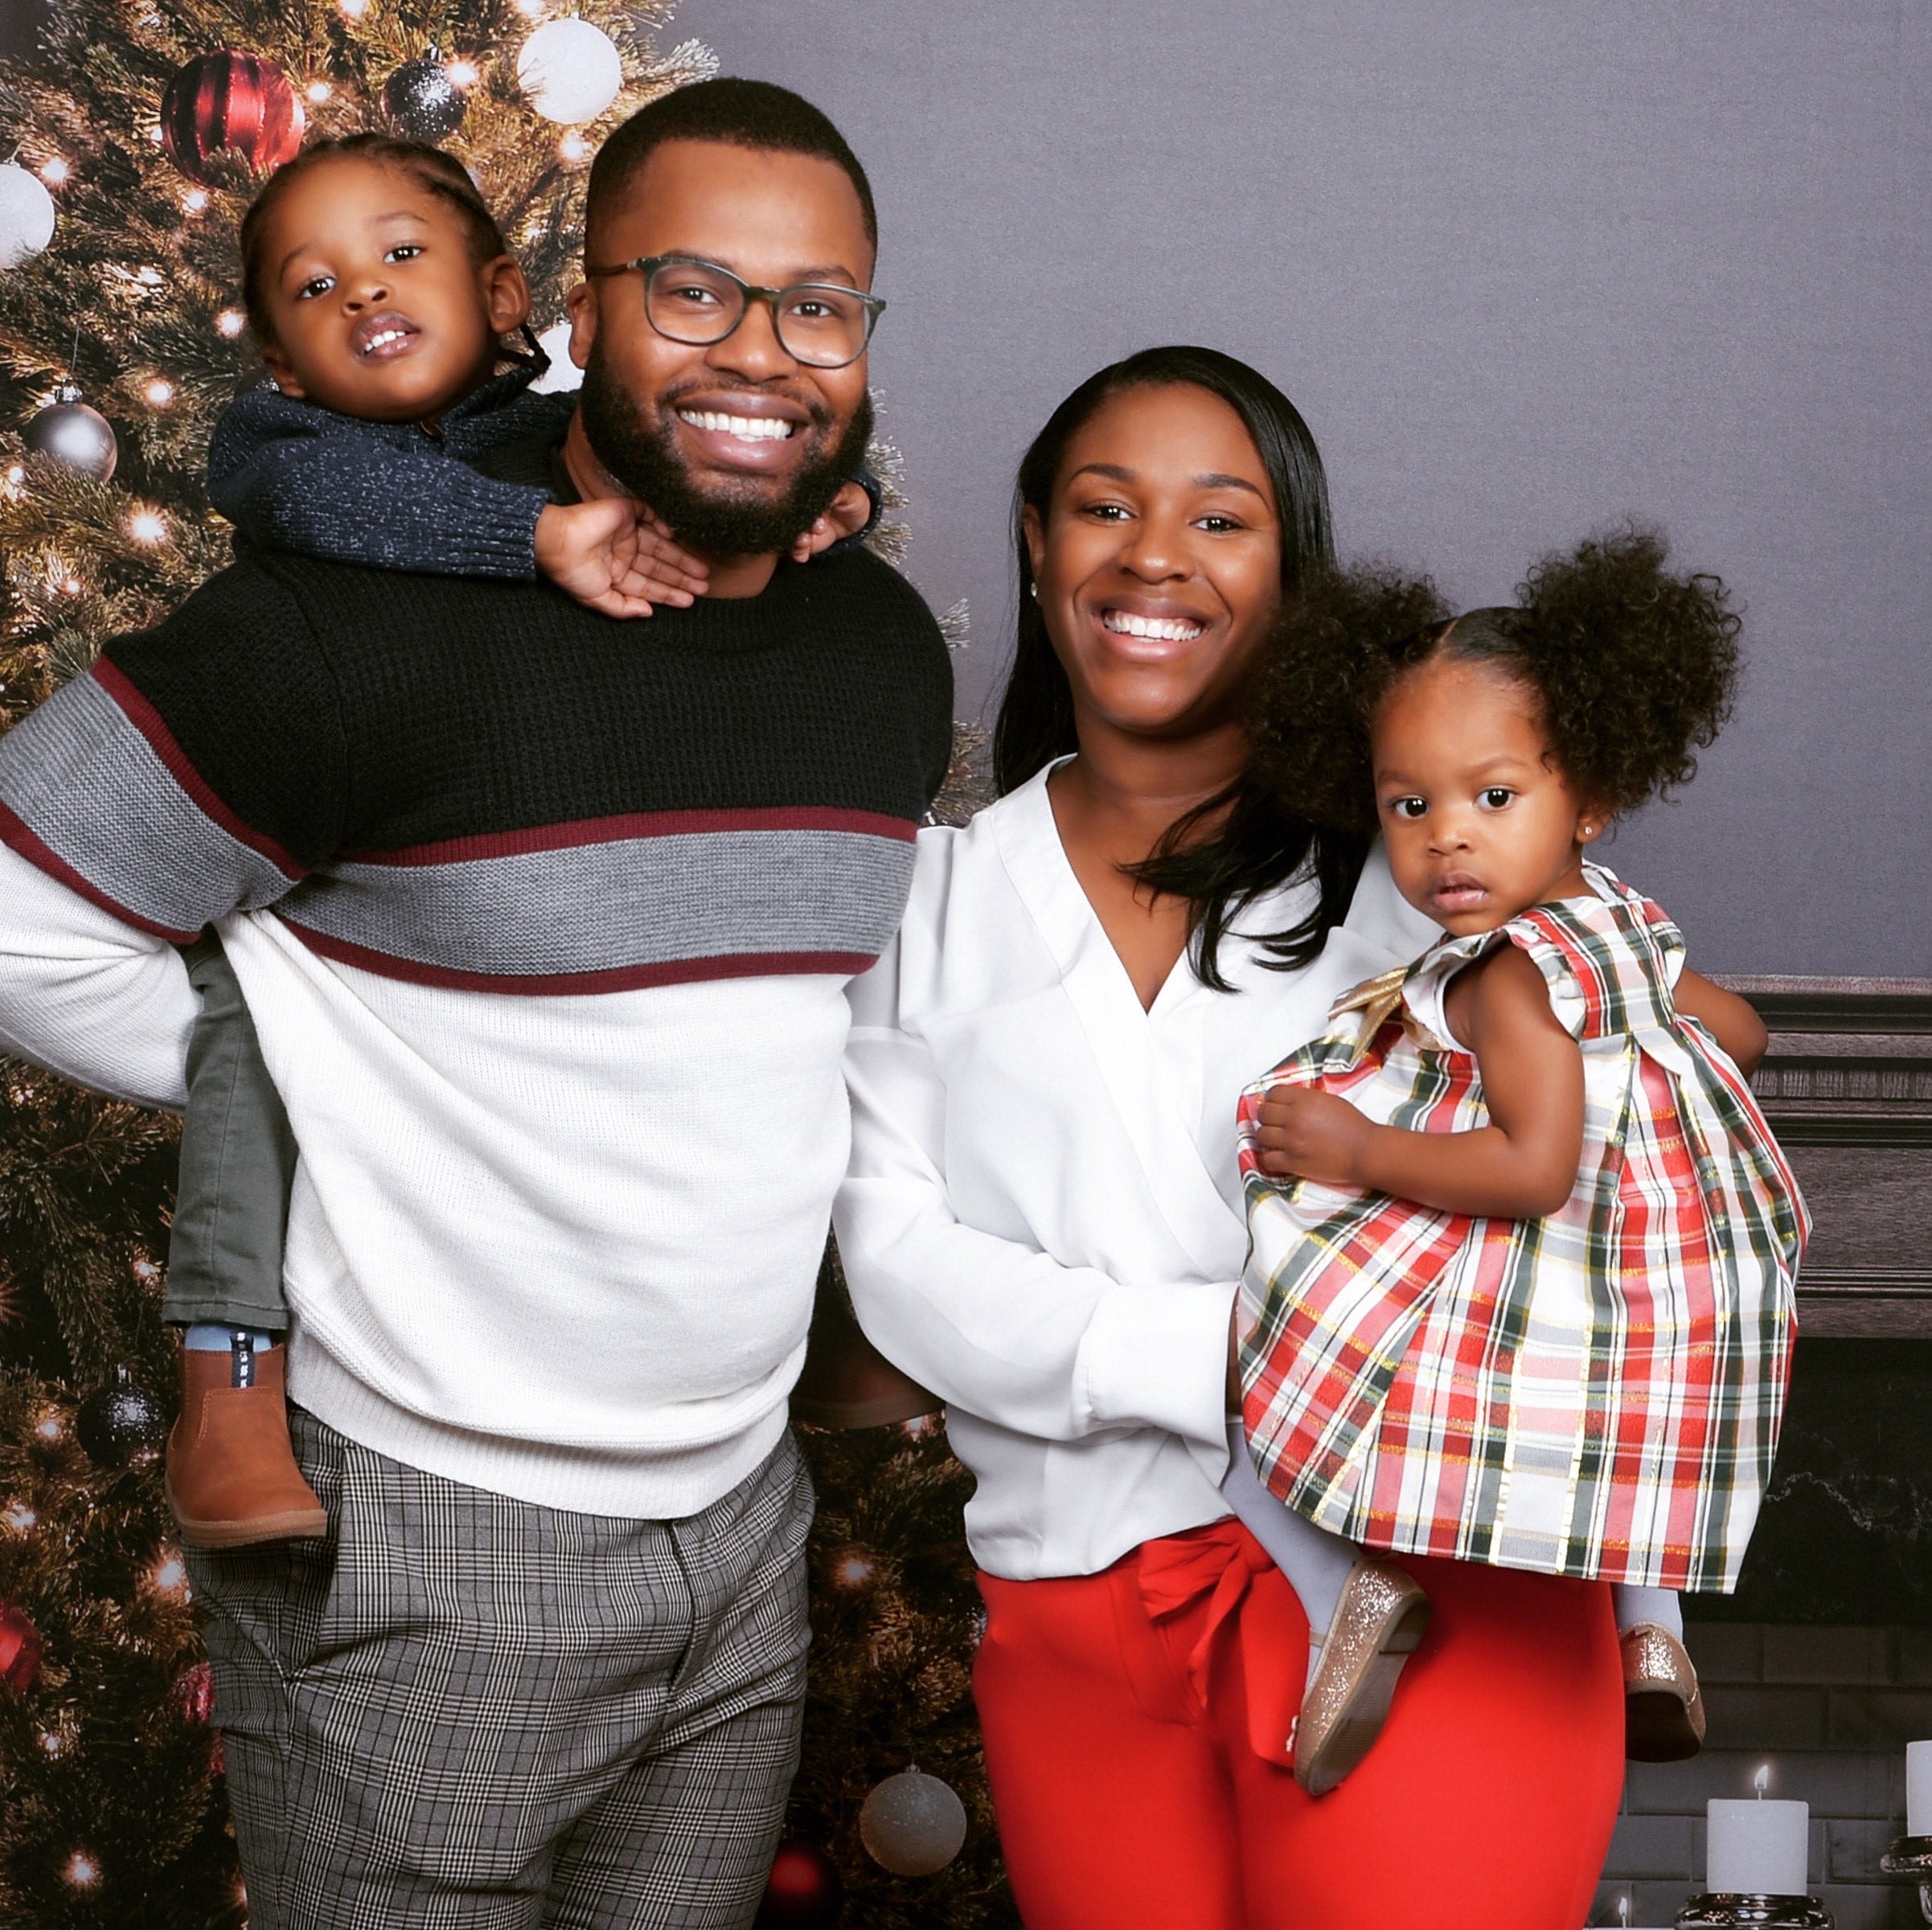 Thaddeus and Miaya Bennett were able to pay for their 4-year-old son to attend pre school with their $600 child tax credit but they could not afford to also send their 3-year-old daughter.